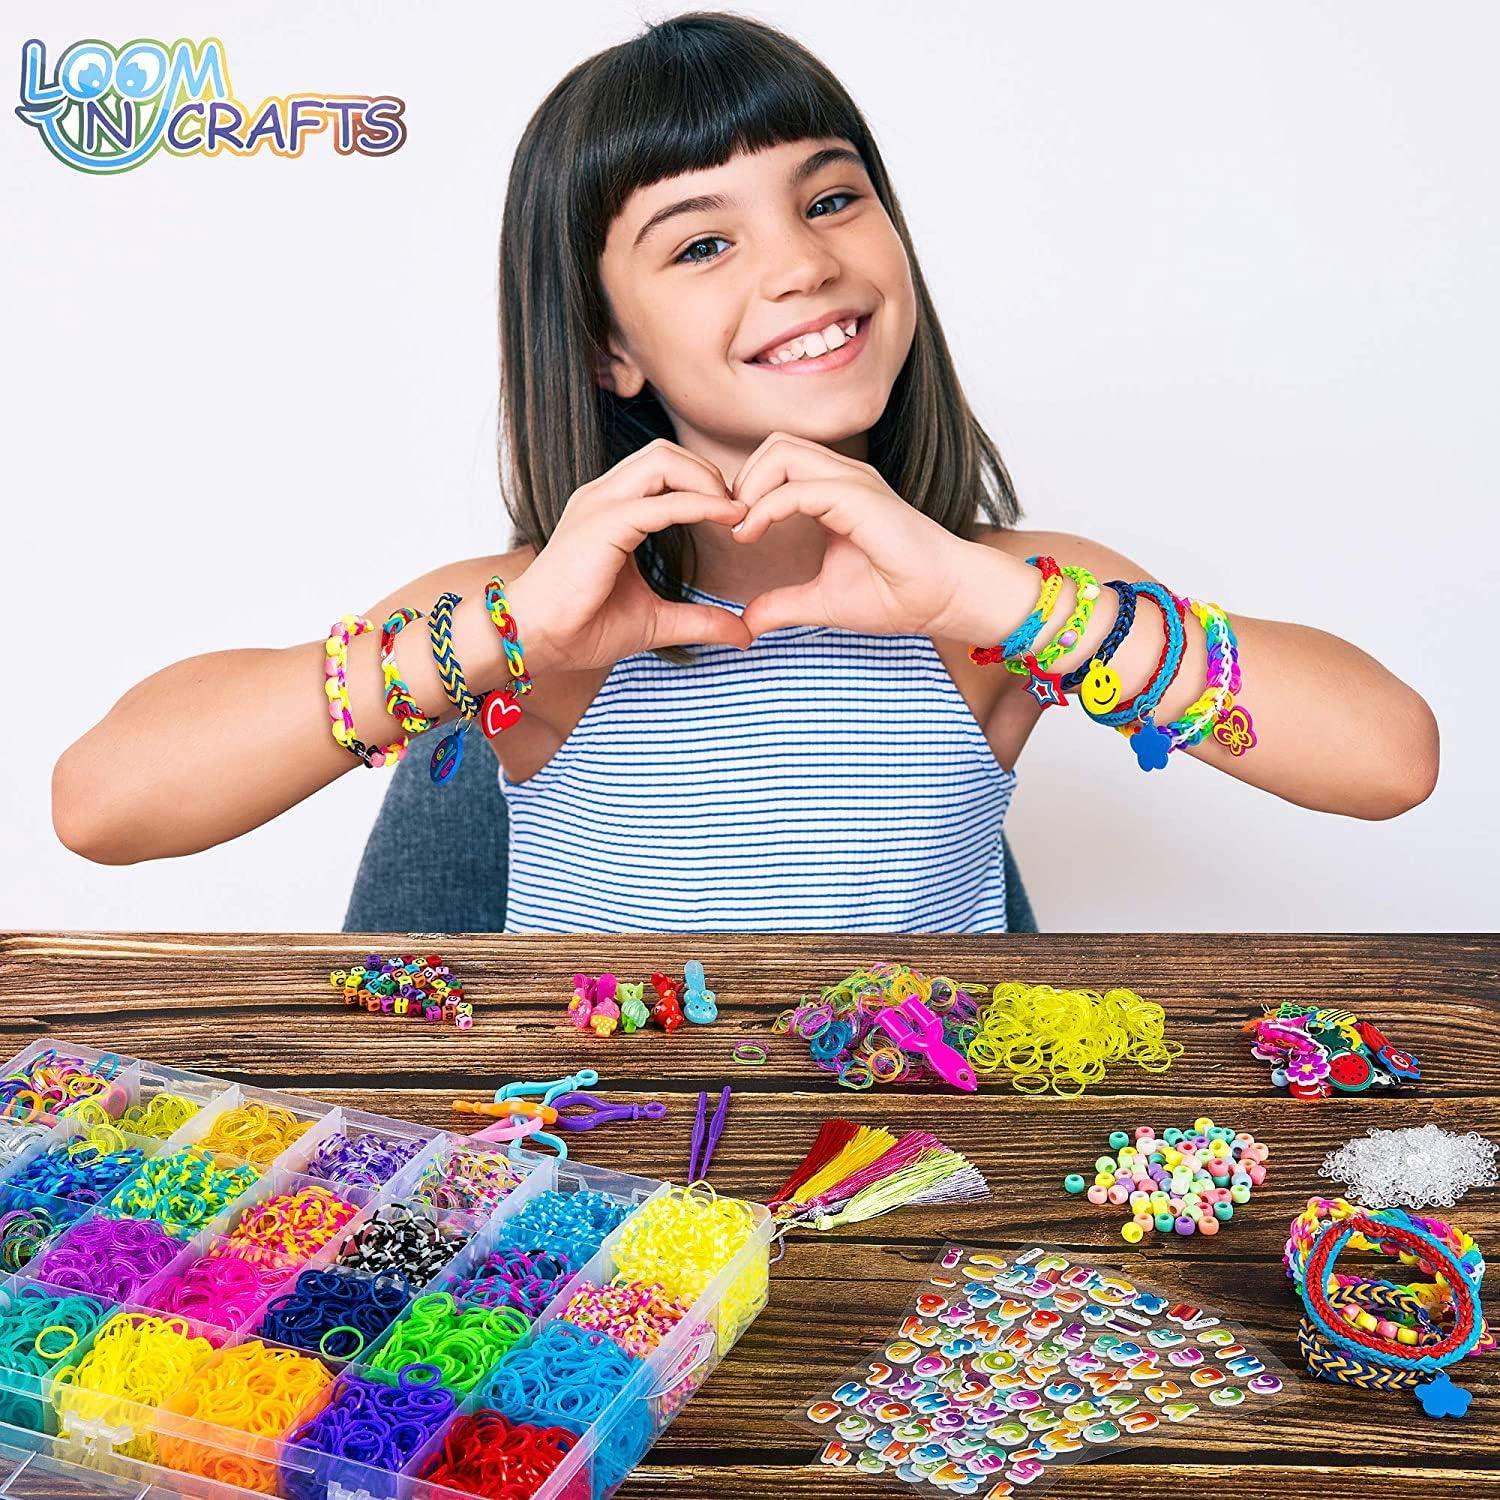 14946+ Rubber Band Bracelet Kit, Bracelet Making Kit, 14400 Hair Bands  Refill 24 Colors, 400 Clips, 100Beads,20 Charms, 10 Hooks, 5 Y Looms,  Rubber